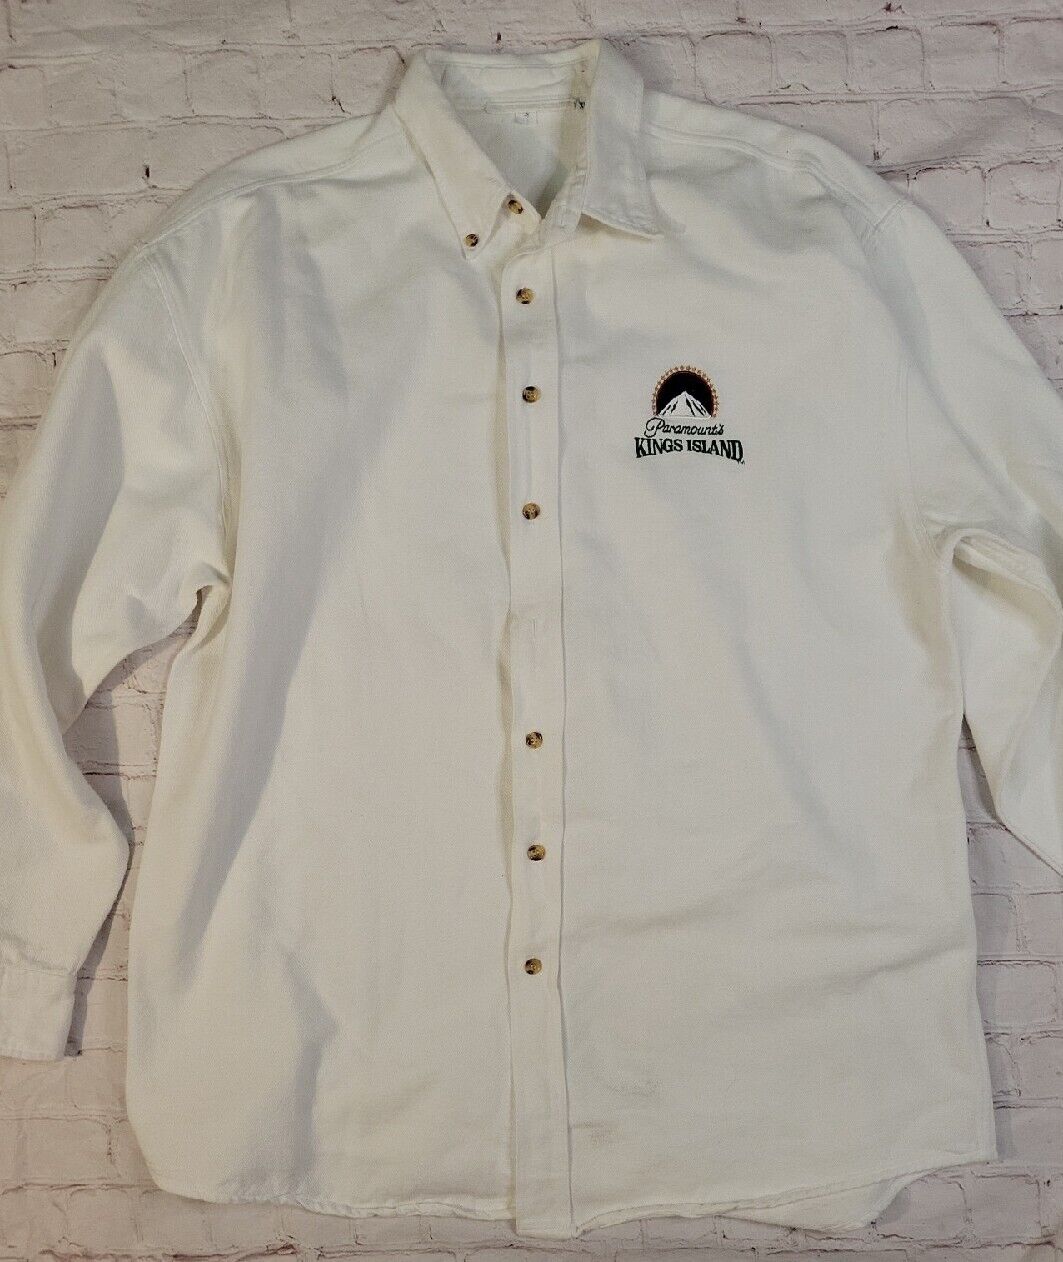 Vtg Paramount Kings Island Heavy Cotton Button Up Down Embroidered Size XL